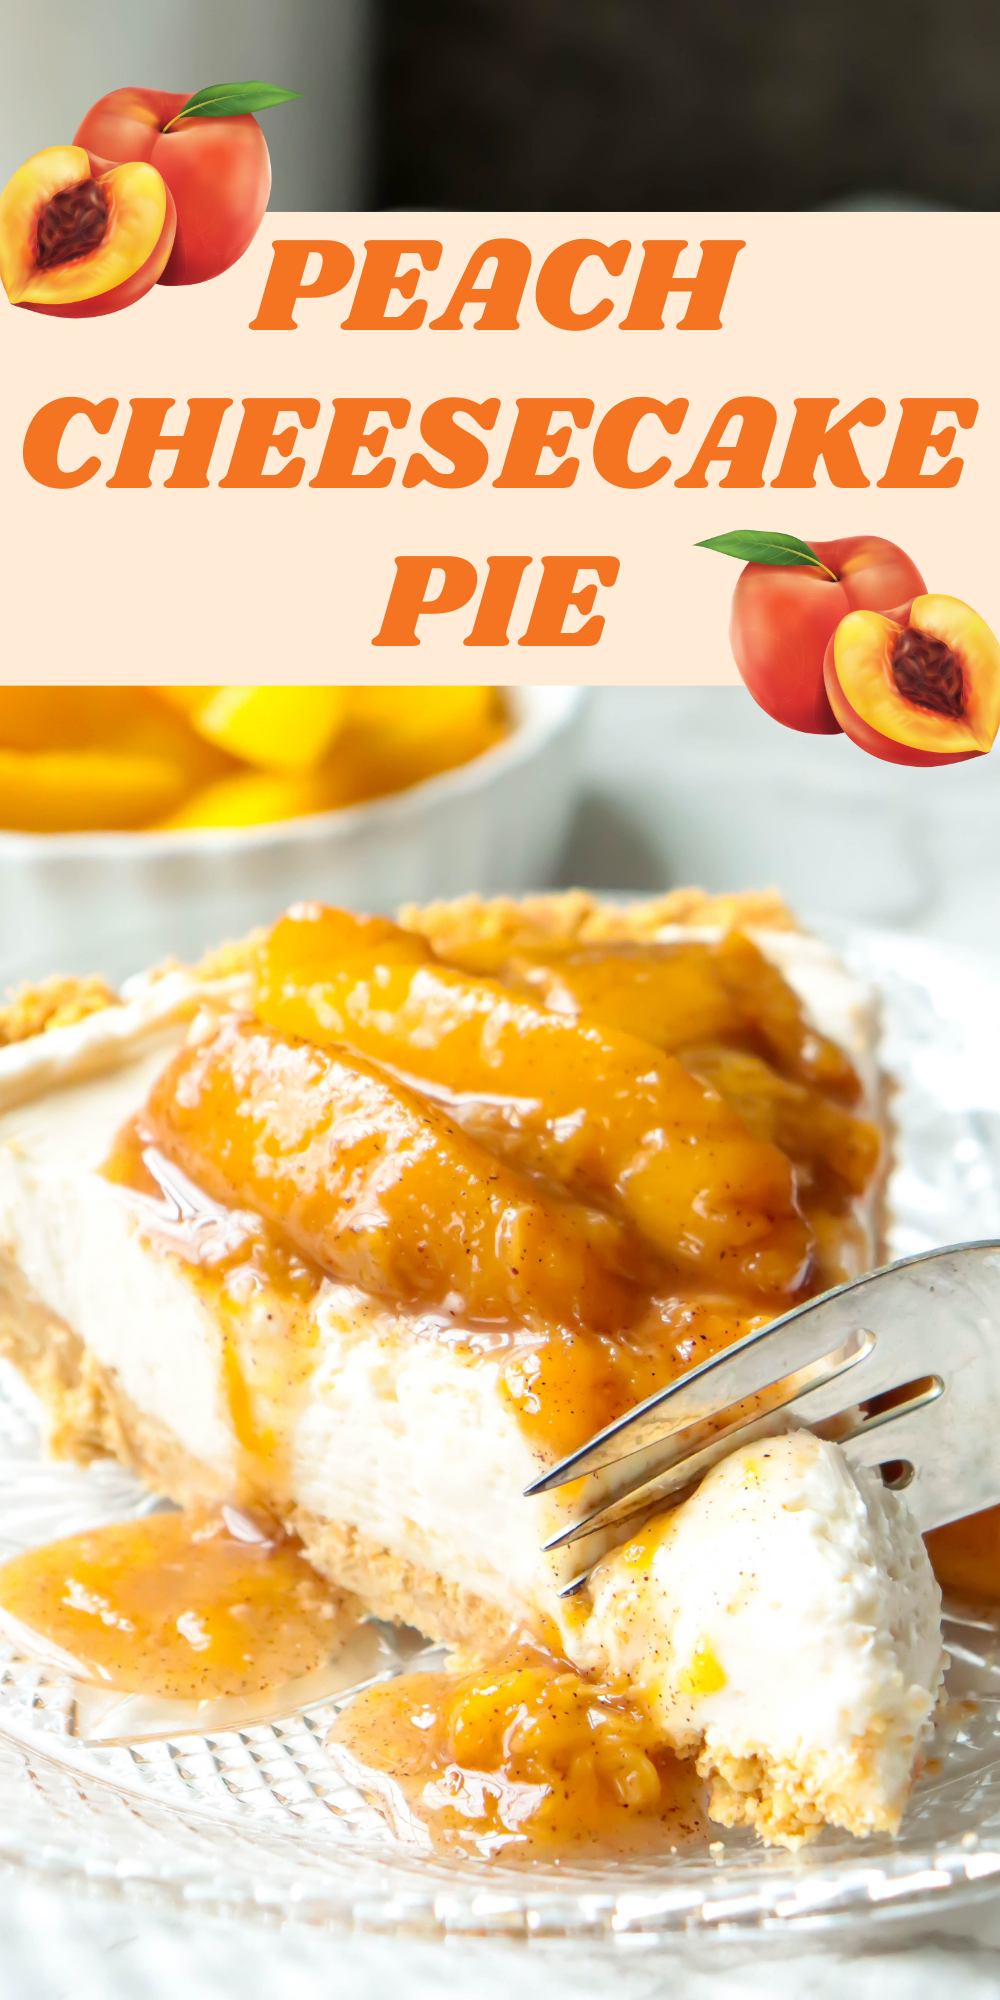 This chilled and creamy Peach Cheesecake Pie has a homemade graham cracker crust and is topped with a delicious peach sauce! via @bigbearswife